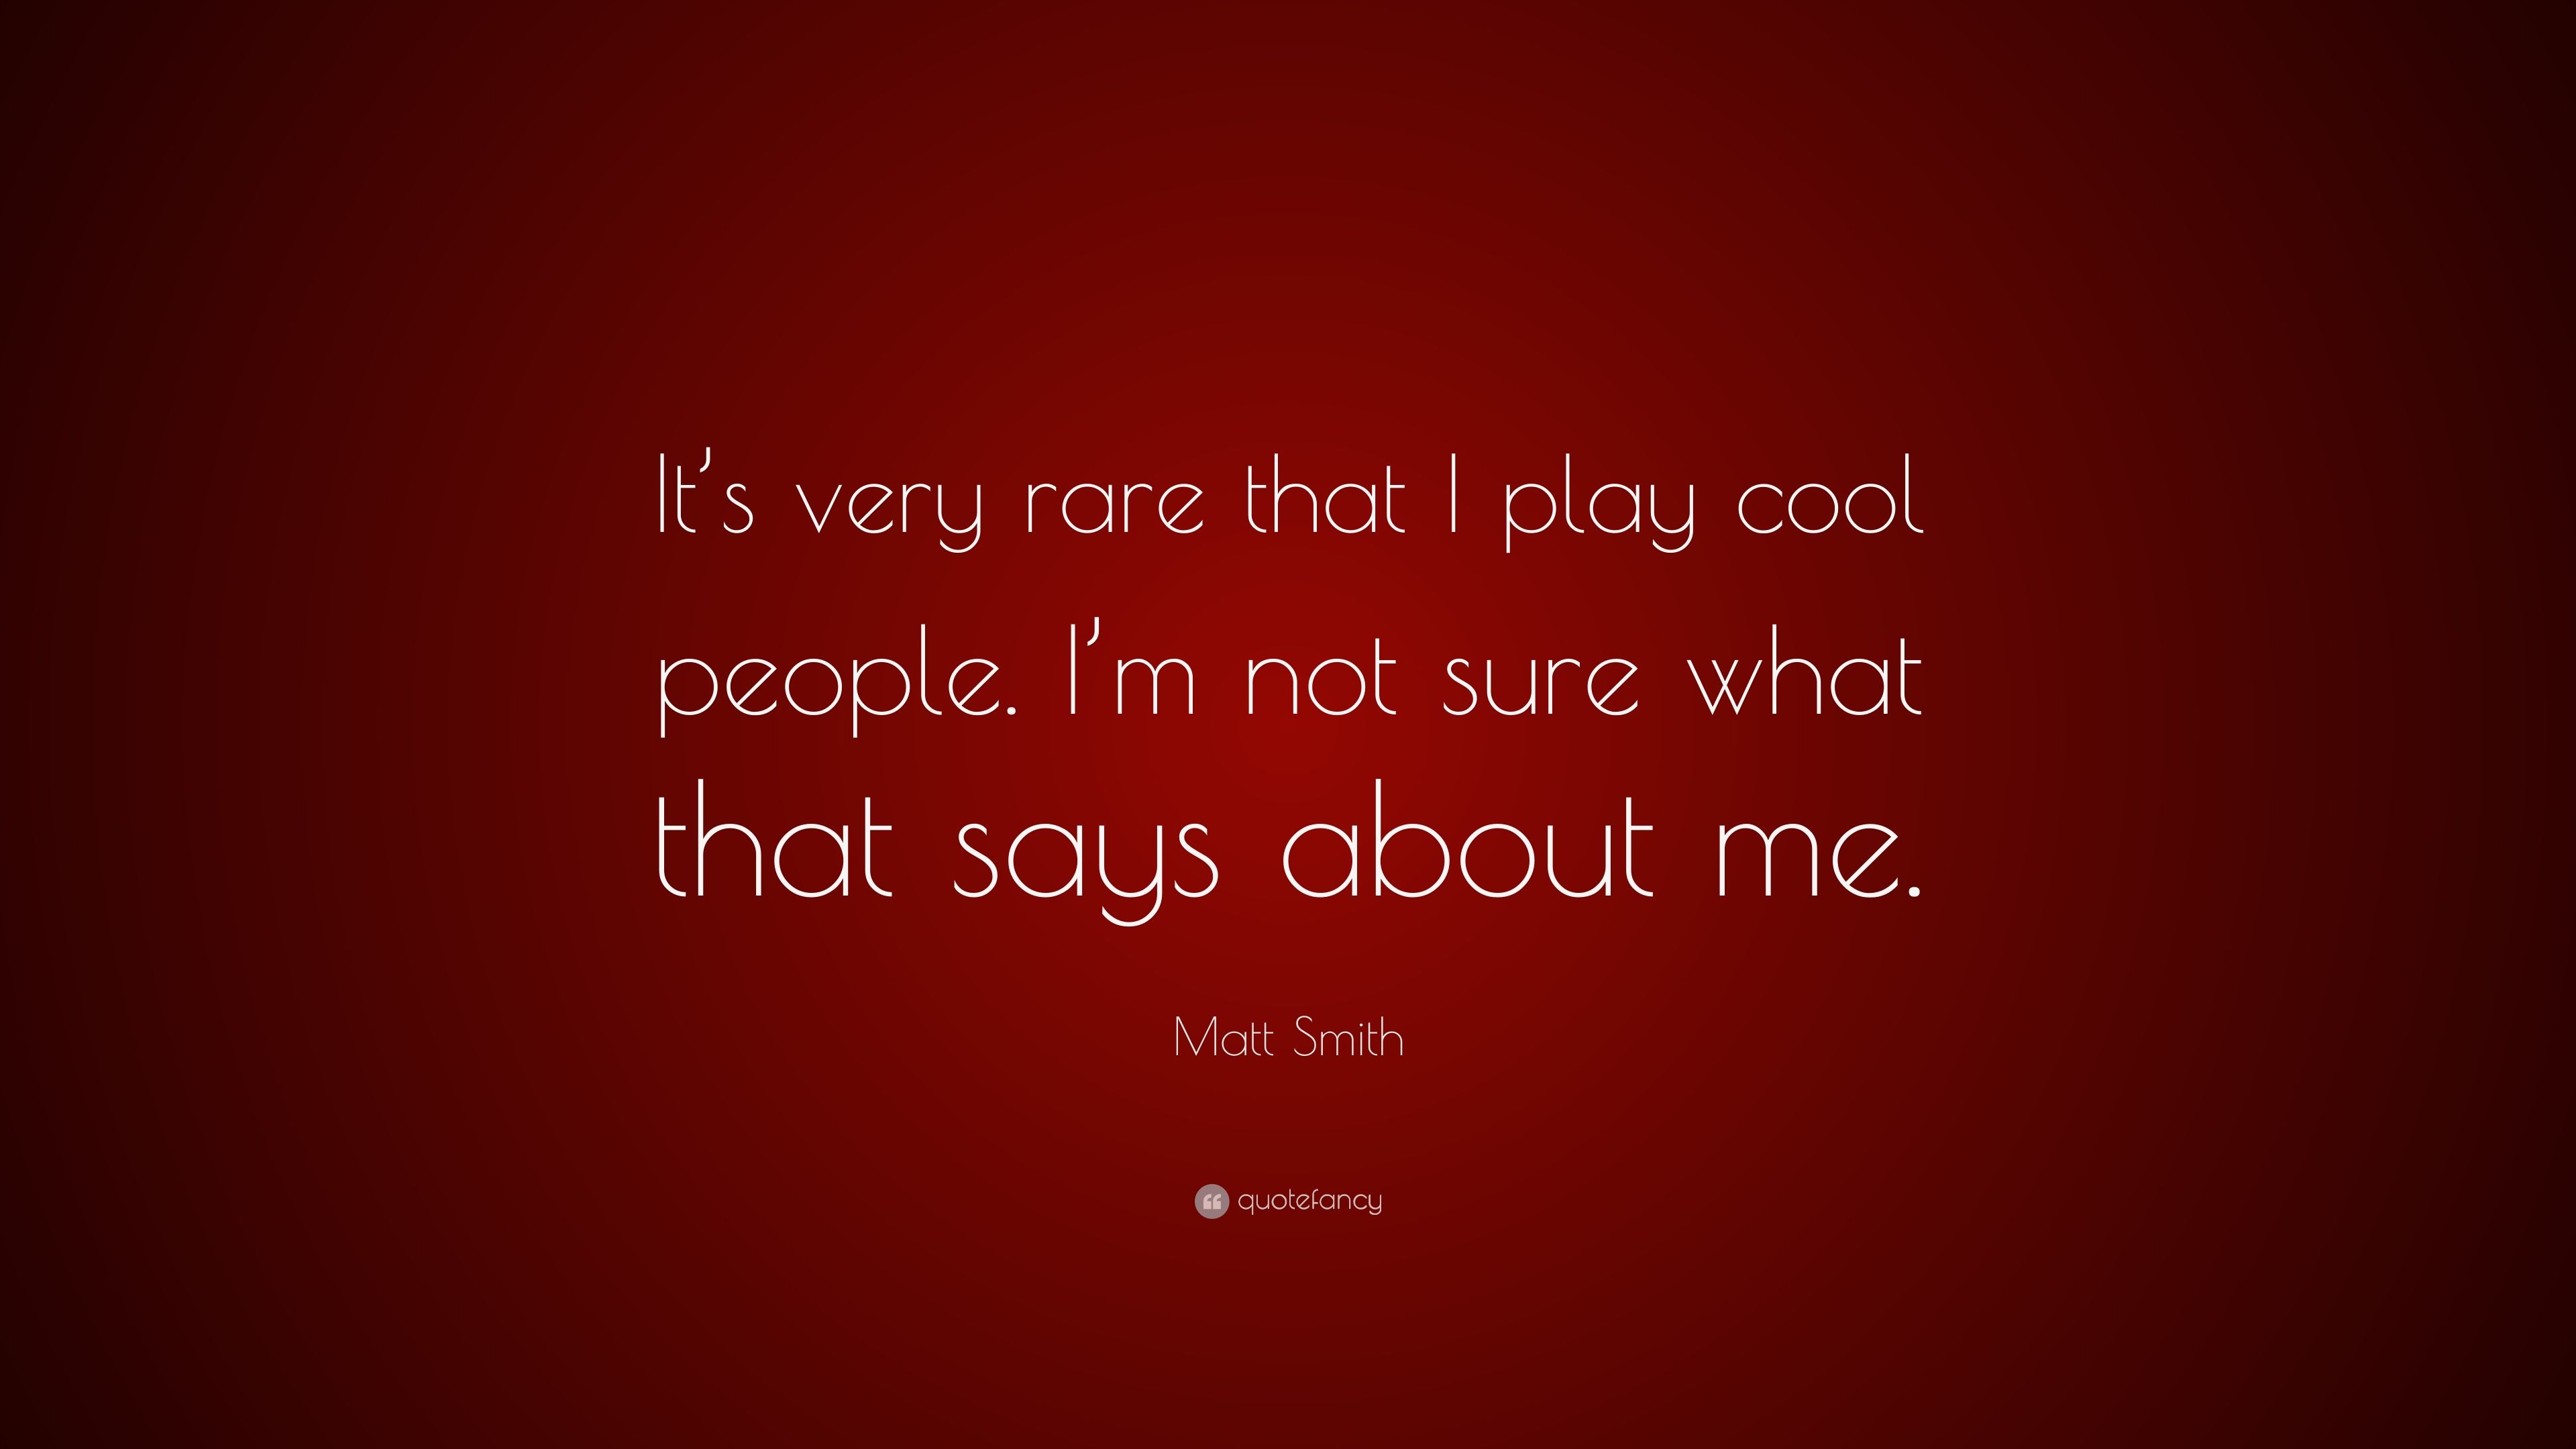 Matt Smith Quote: “It's very rare that I play cool people. I'm not